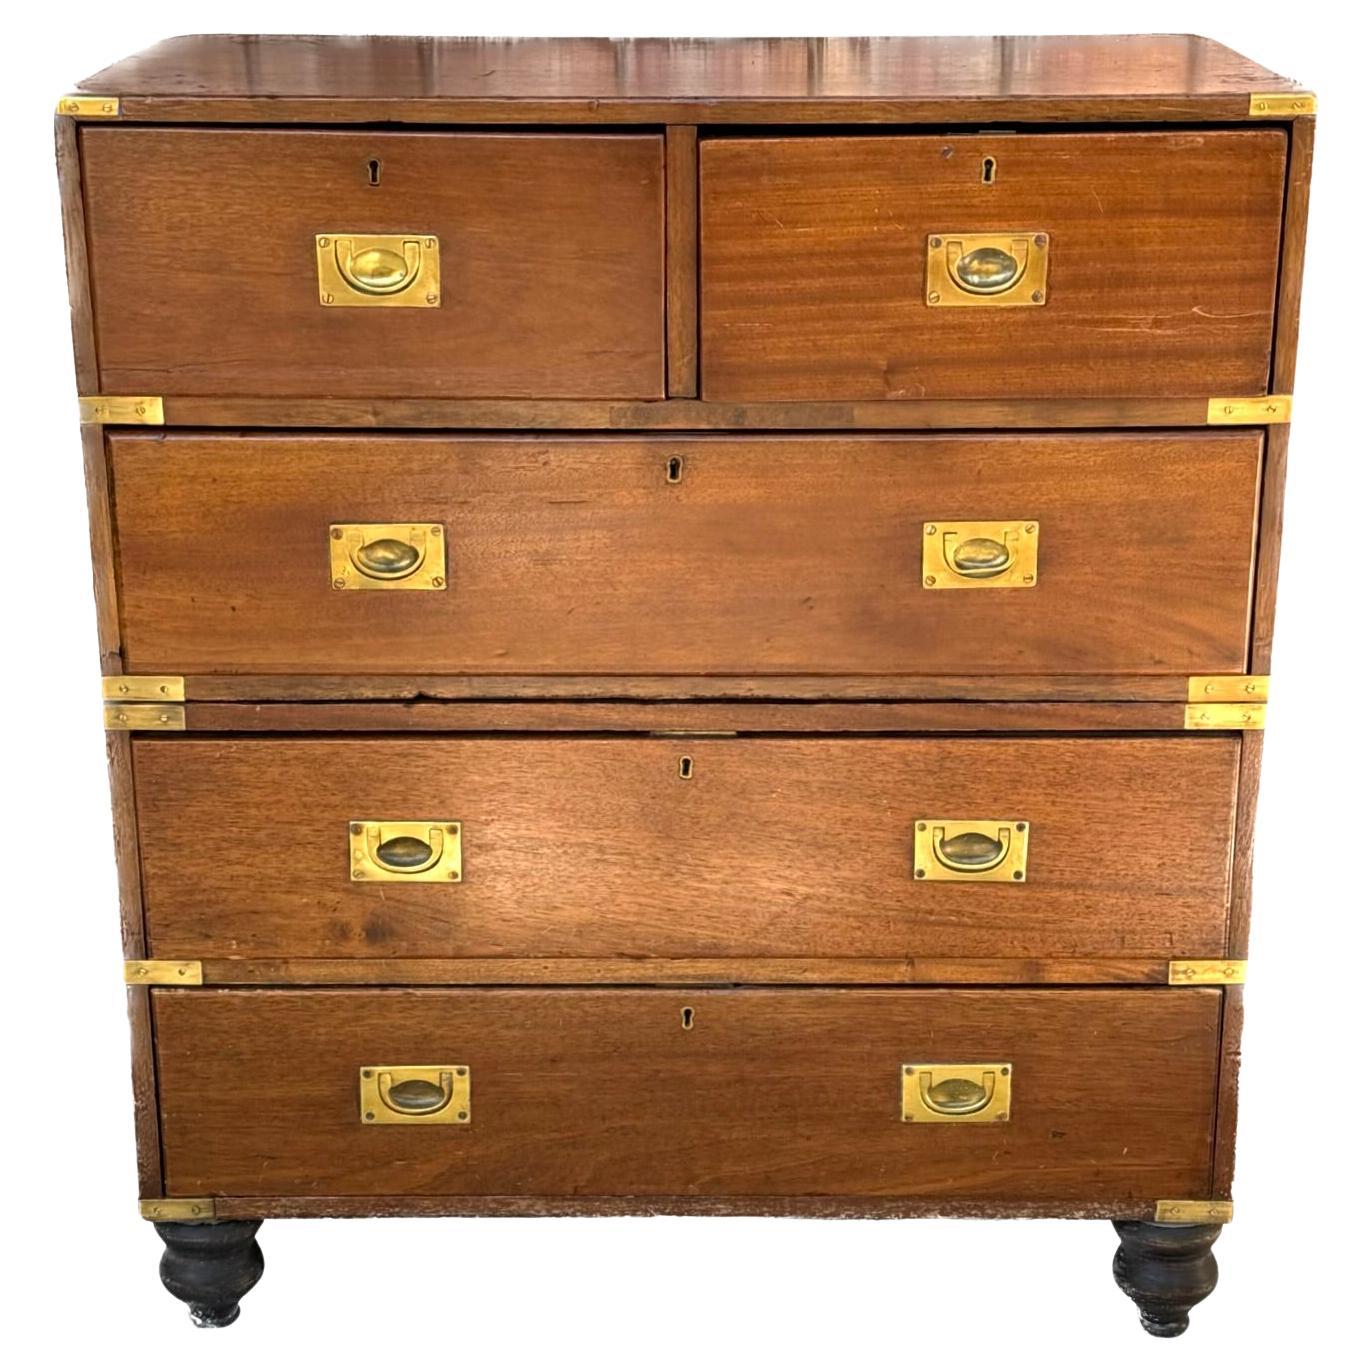 19th Century English Mahogany Campaign Chest. Chest has two short drawers on top with three longer drawers underneath. Chest is made of two parts. Original brass hardware. Beautiful patina. Has stamp on brass lock 